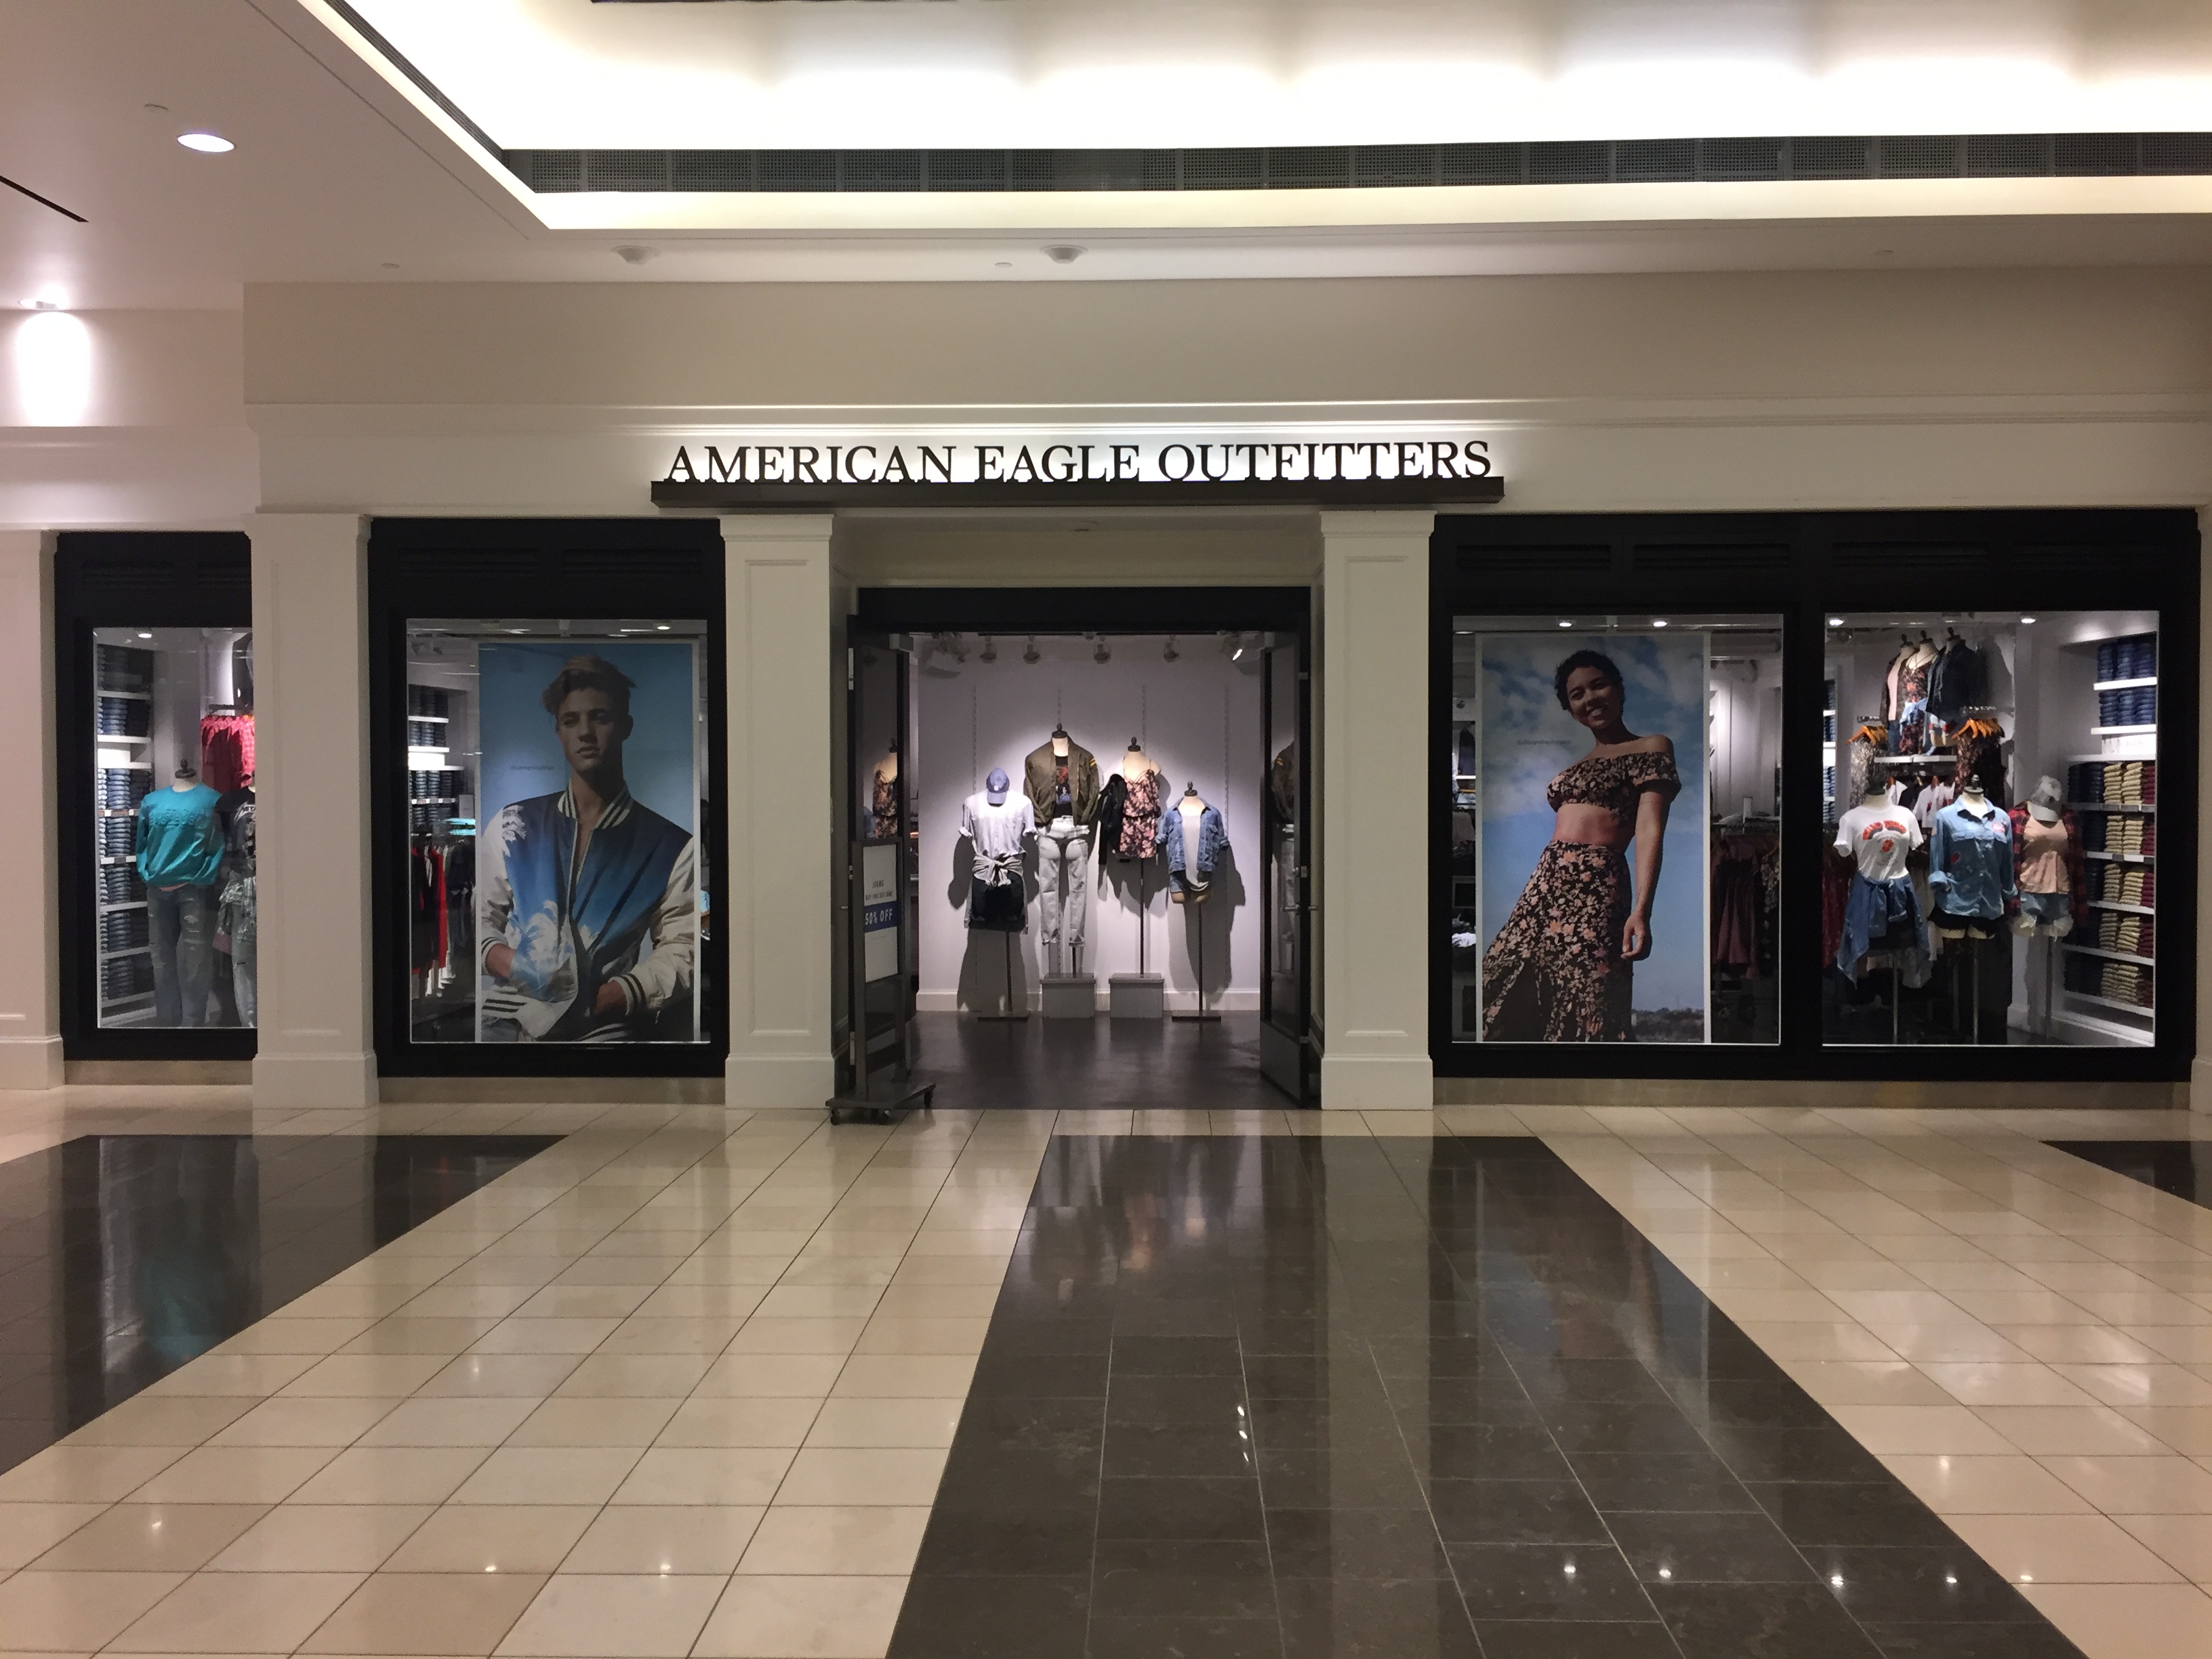 Aerie - Check out our new spot inside the Easton Mall American